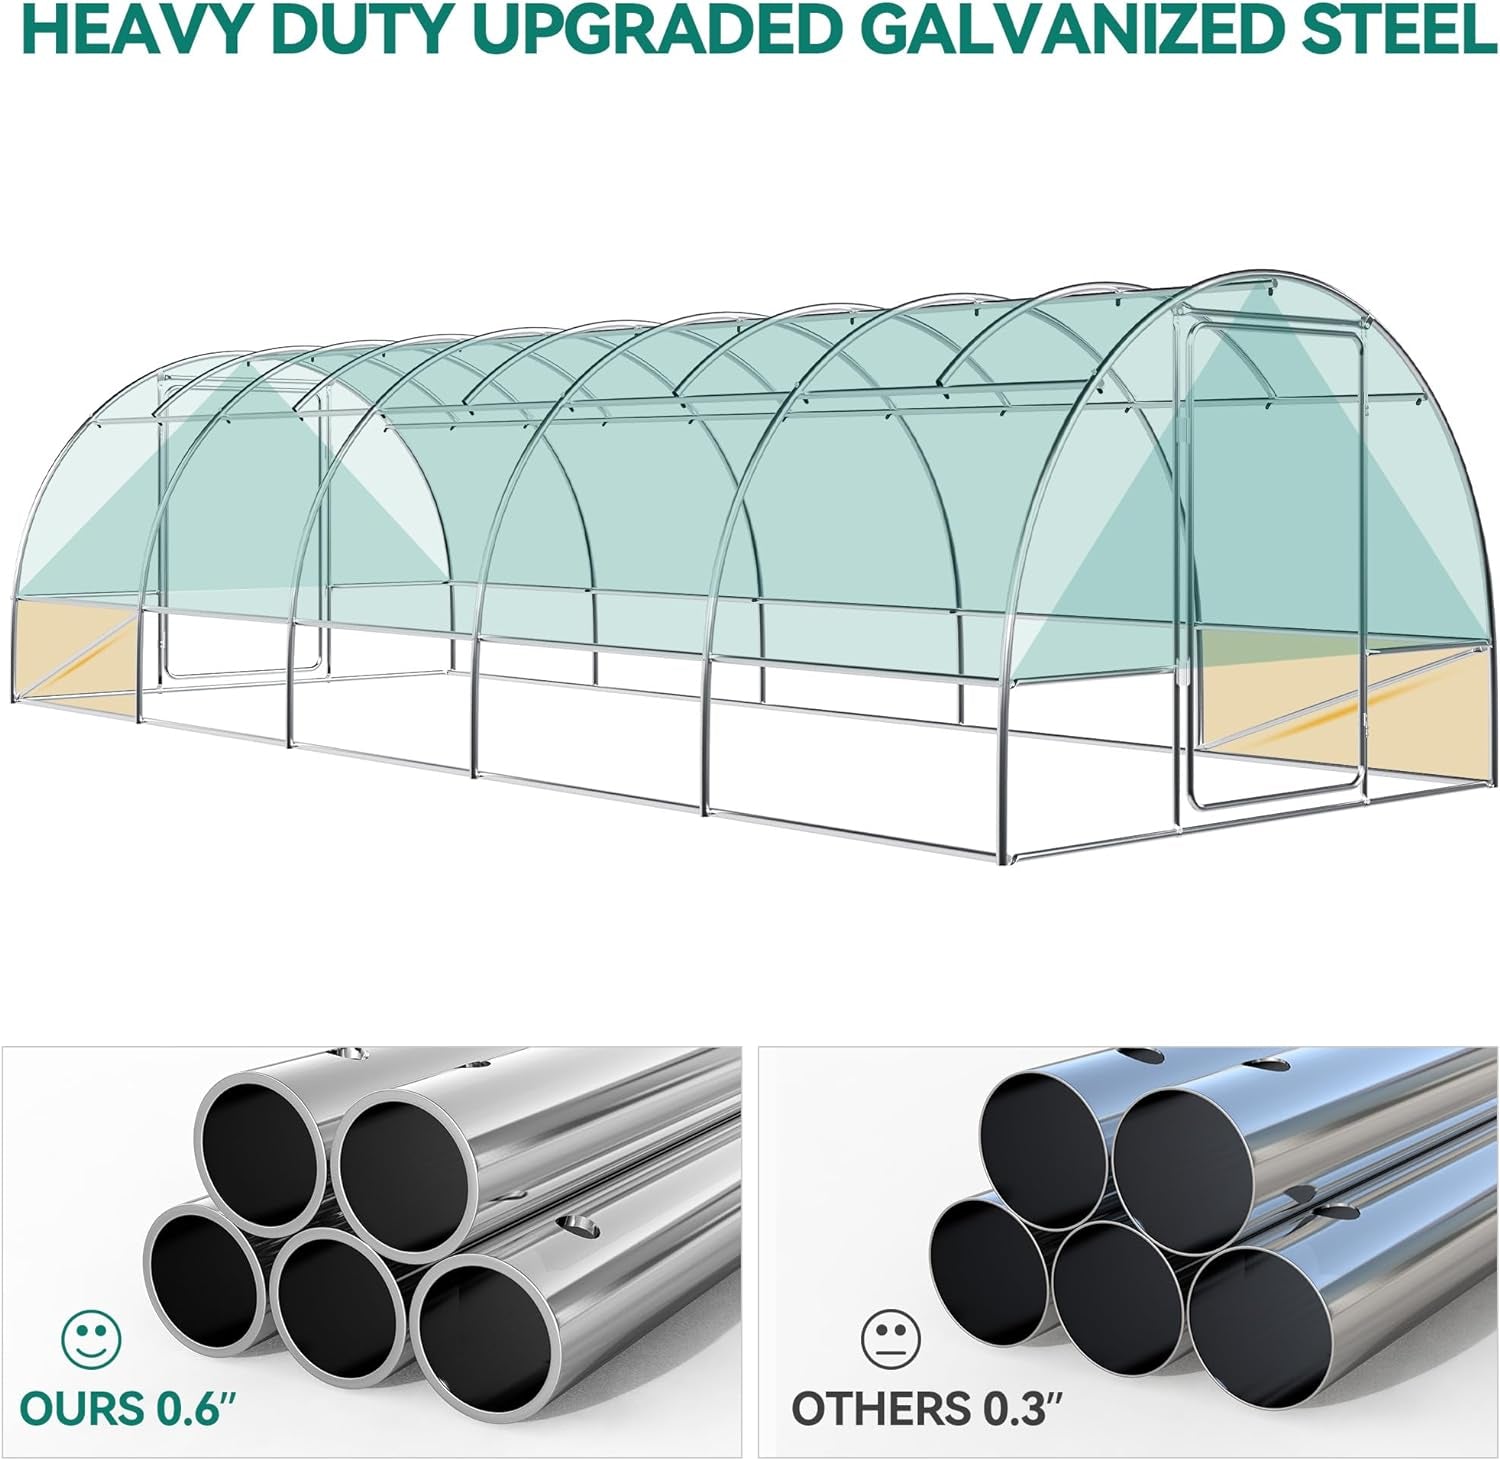 26X10X7Ft Greenhouse Extra Large Heavy Duty Large 2 Swing Doors Walk-In Greenhouses Tunnel Green Houses Outdoor 10 Windows Gardening Upgraded Galvanized Steel Garden, Green - Design By Technique